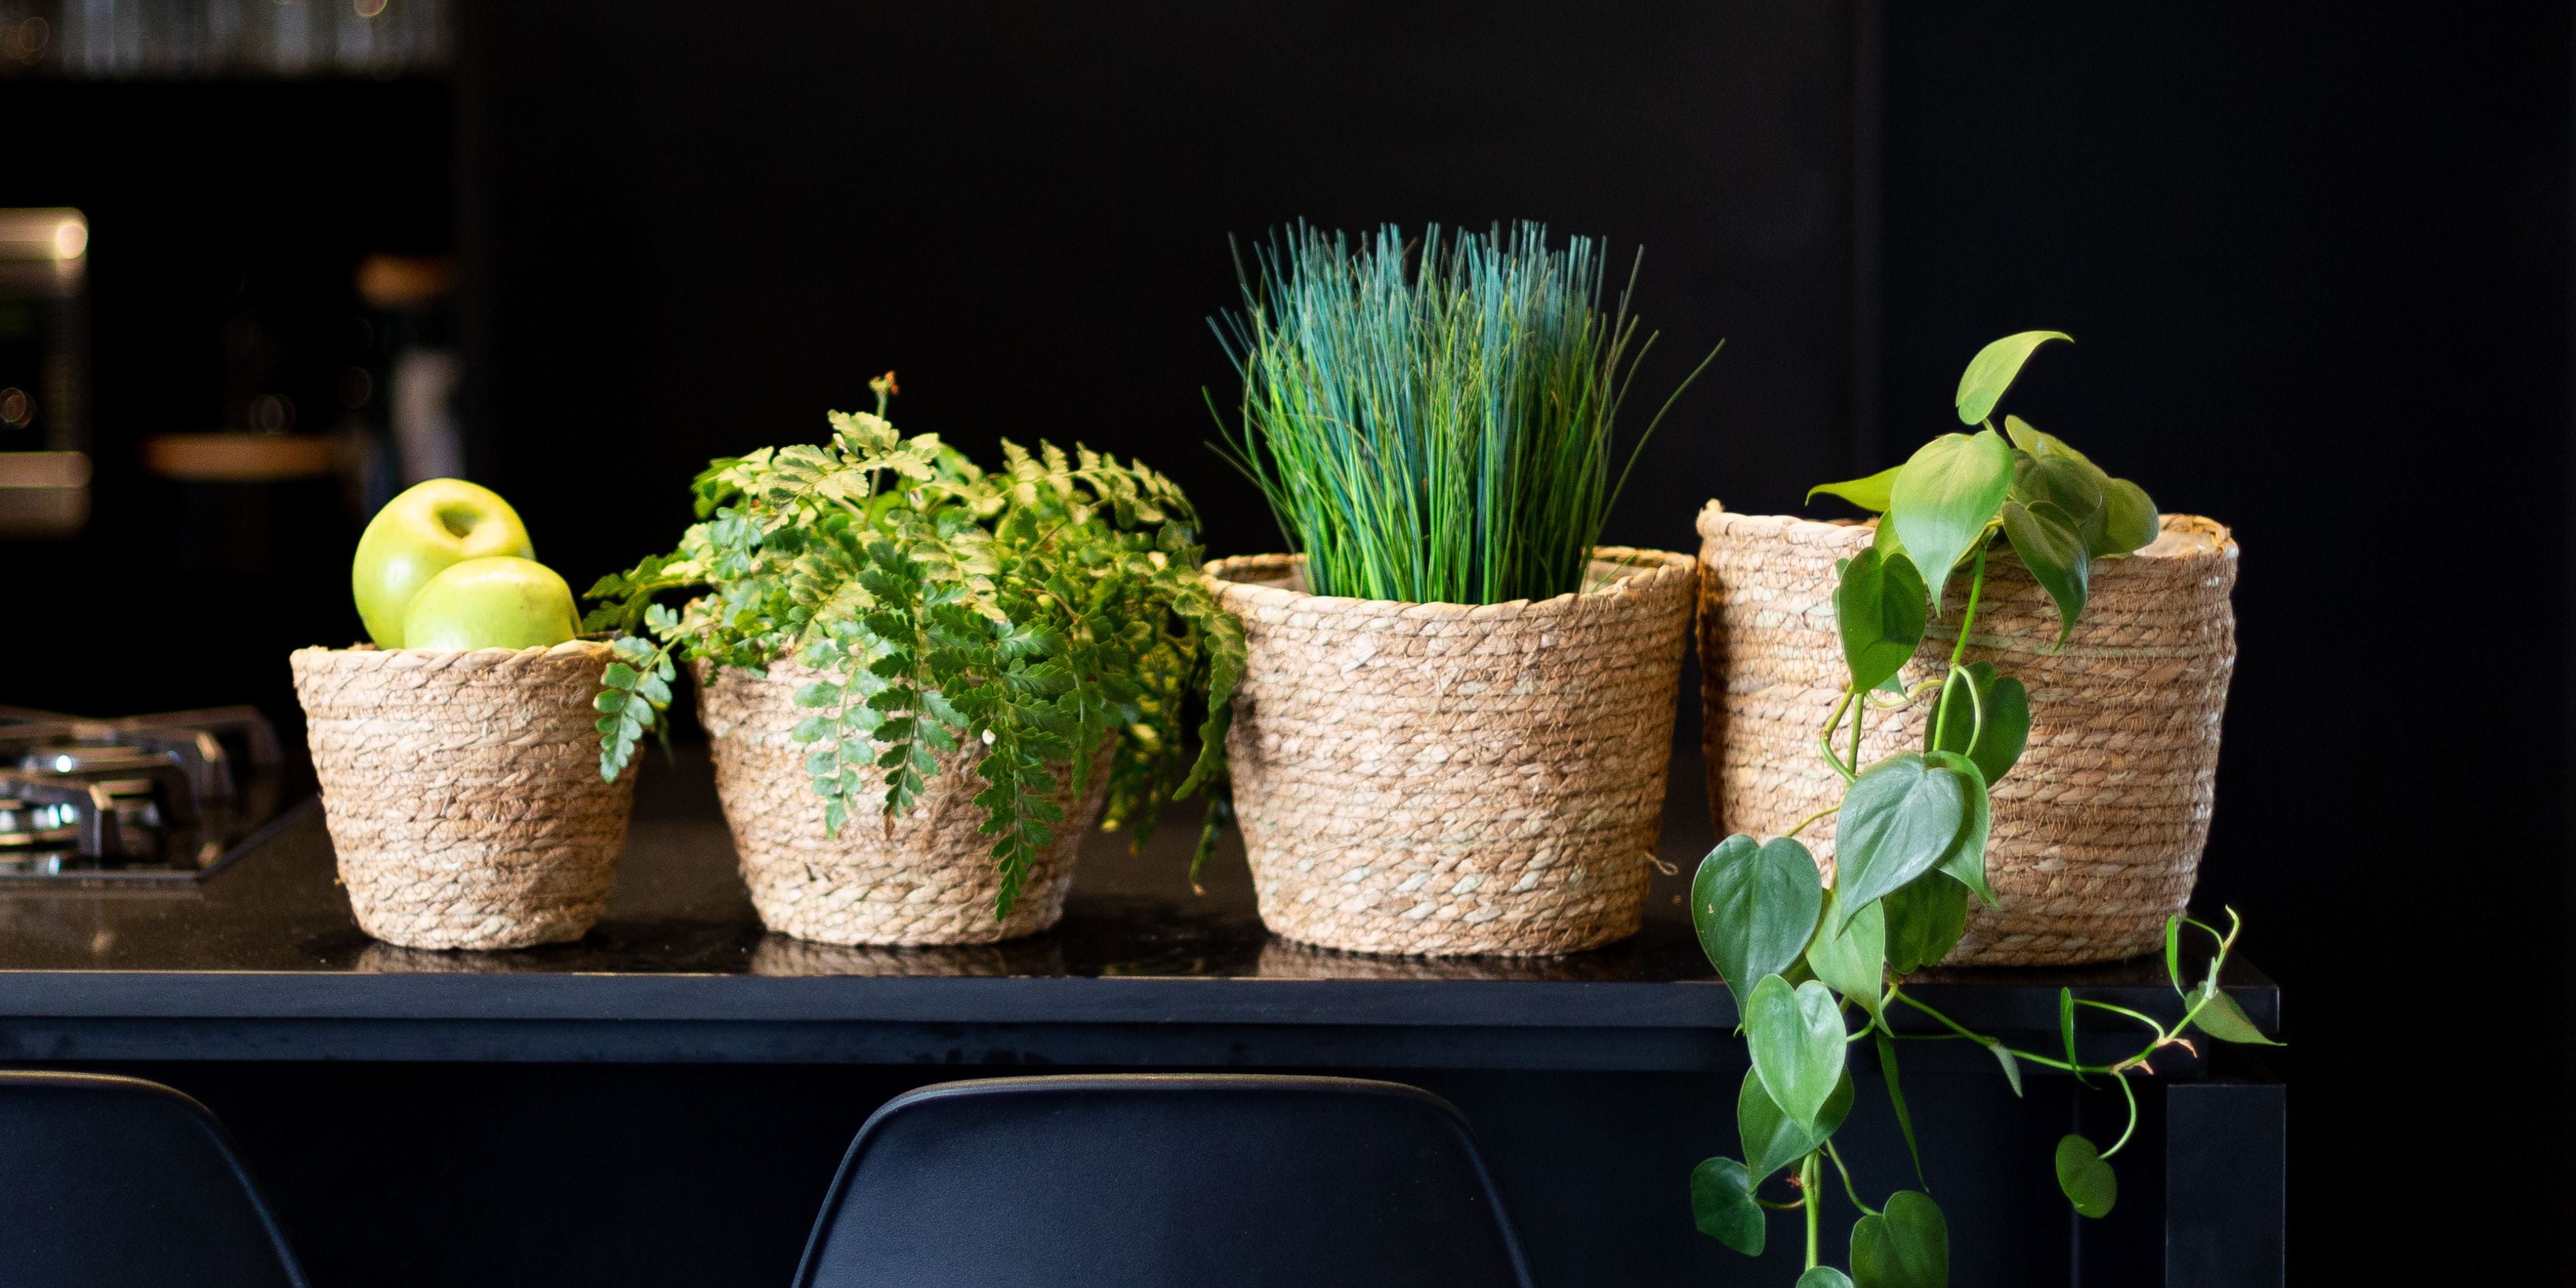 Green plants stored in woven grass flower baskets sitting on a black bench.